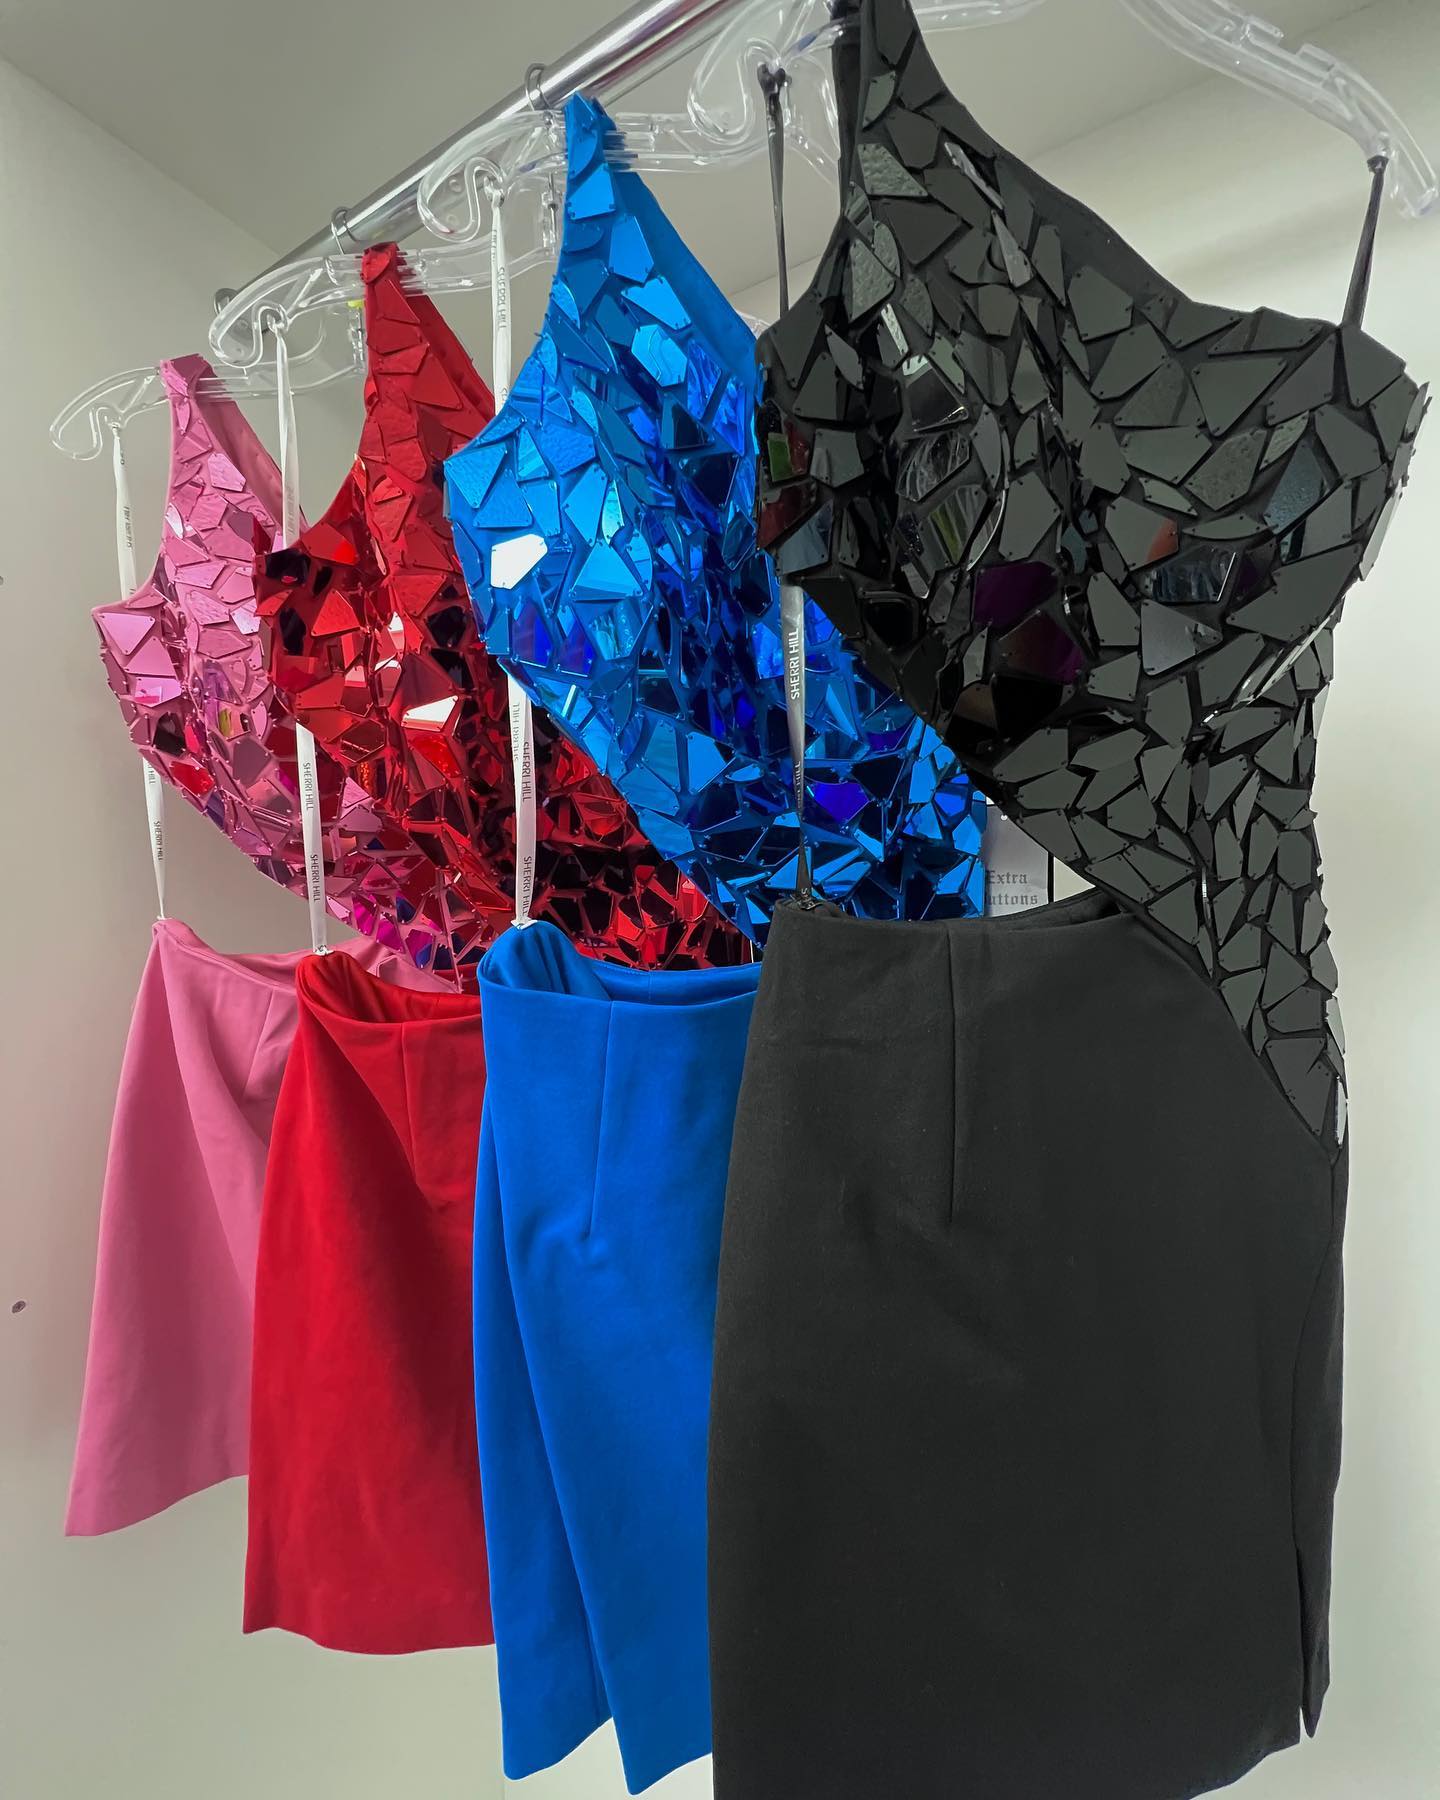 Mirror Hoco Dress 2023 Glass Cut-Out Lady Formal Event Cocktail Party Homecoming Pageant Short Prom Dance Gown Black Peacocks Pink Red Sheath One-Shoulder 2k23 Split